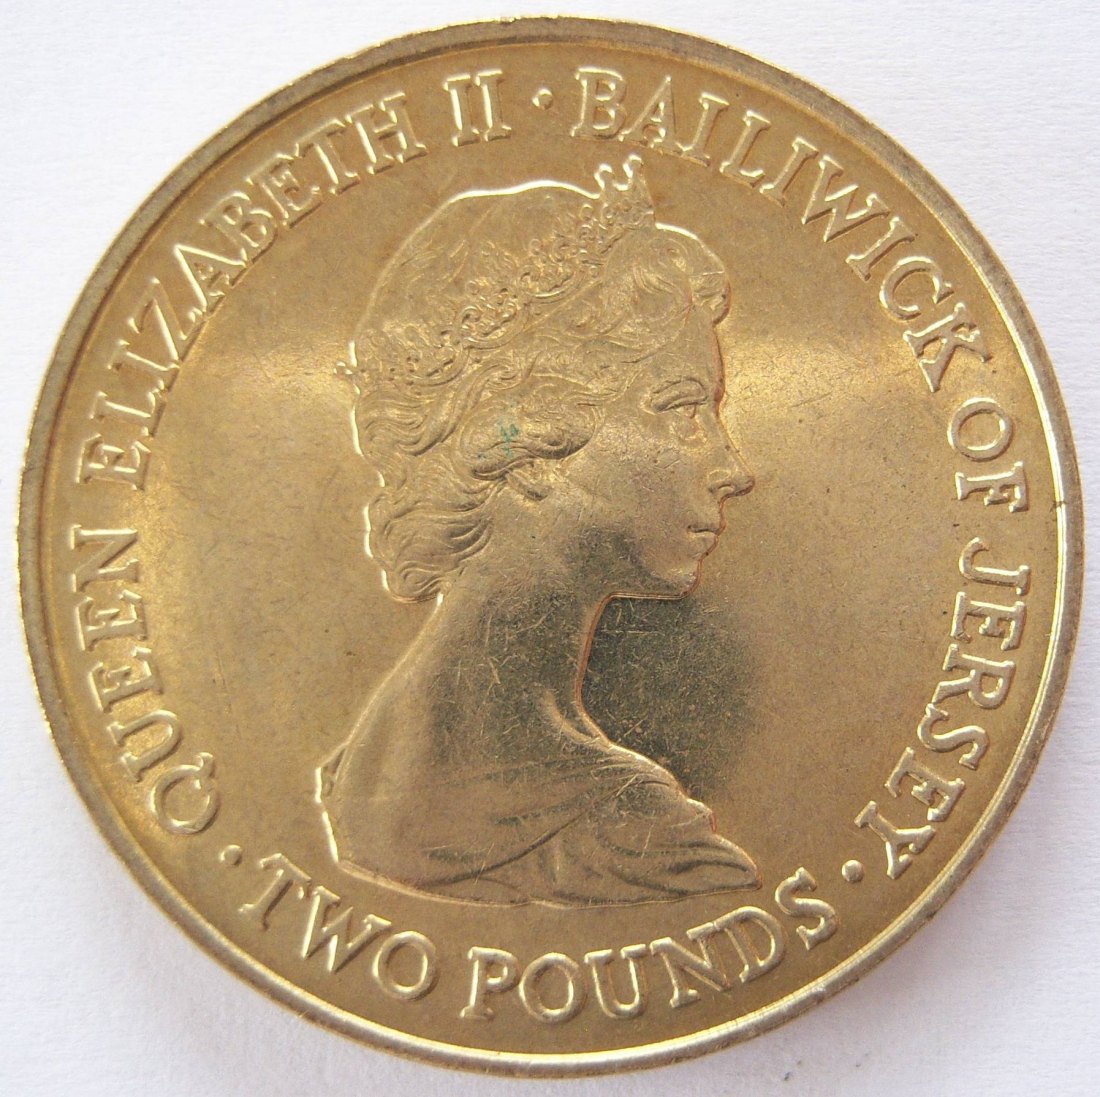  Bailiwick of Jersey Two 2 Pounds 1981   